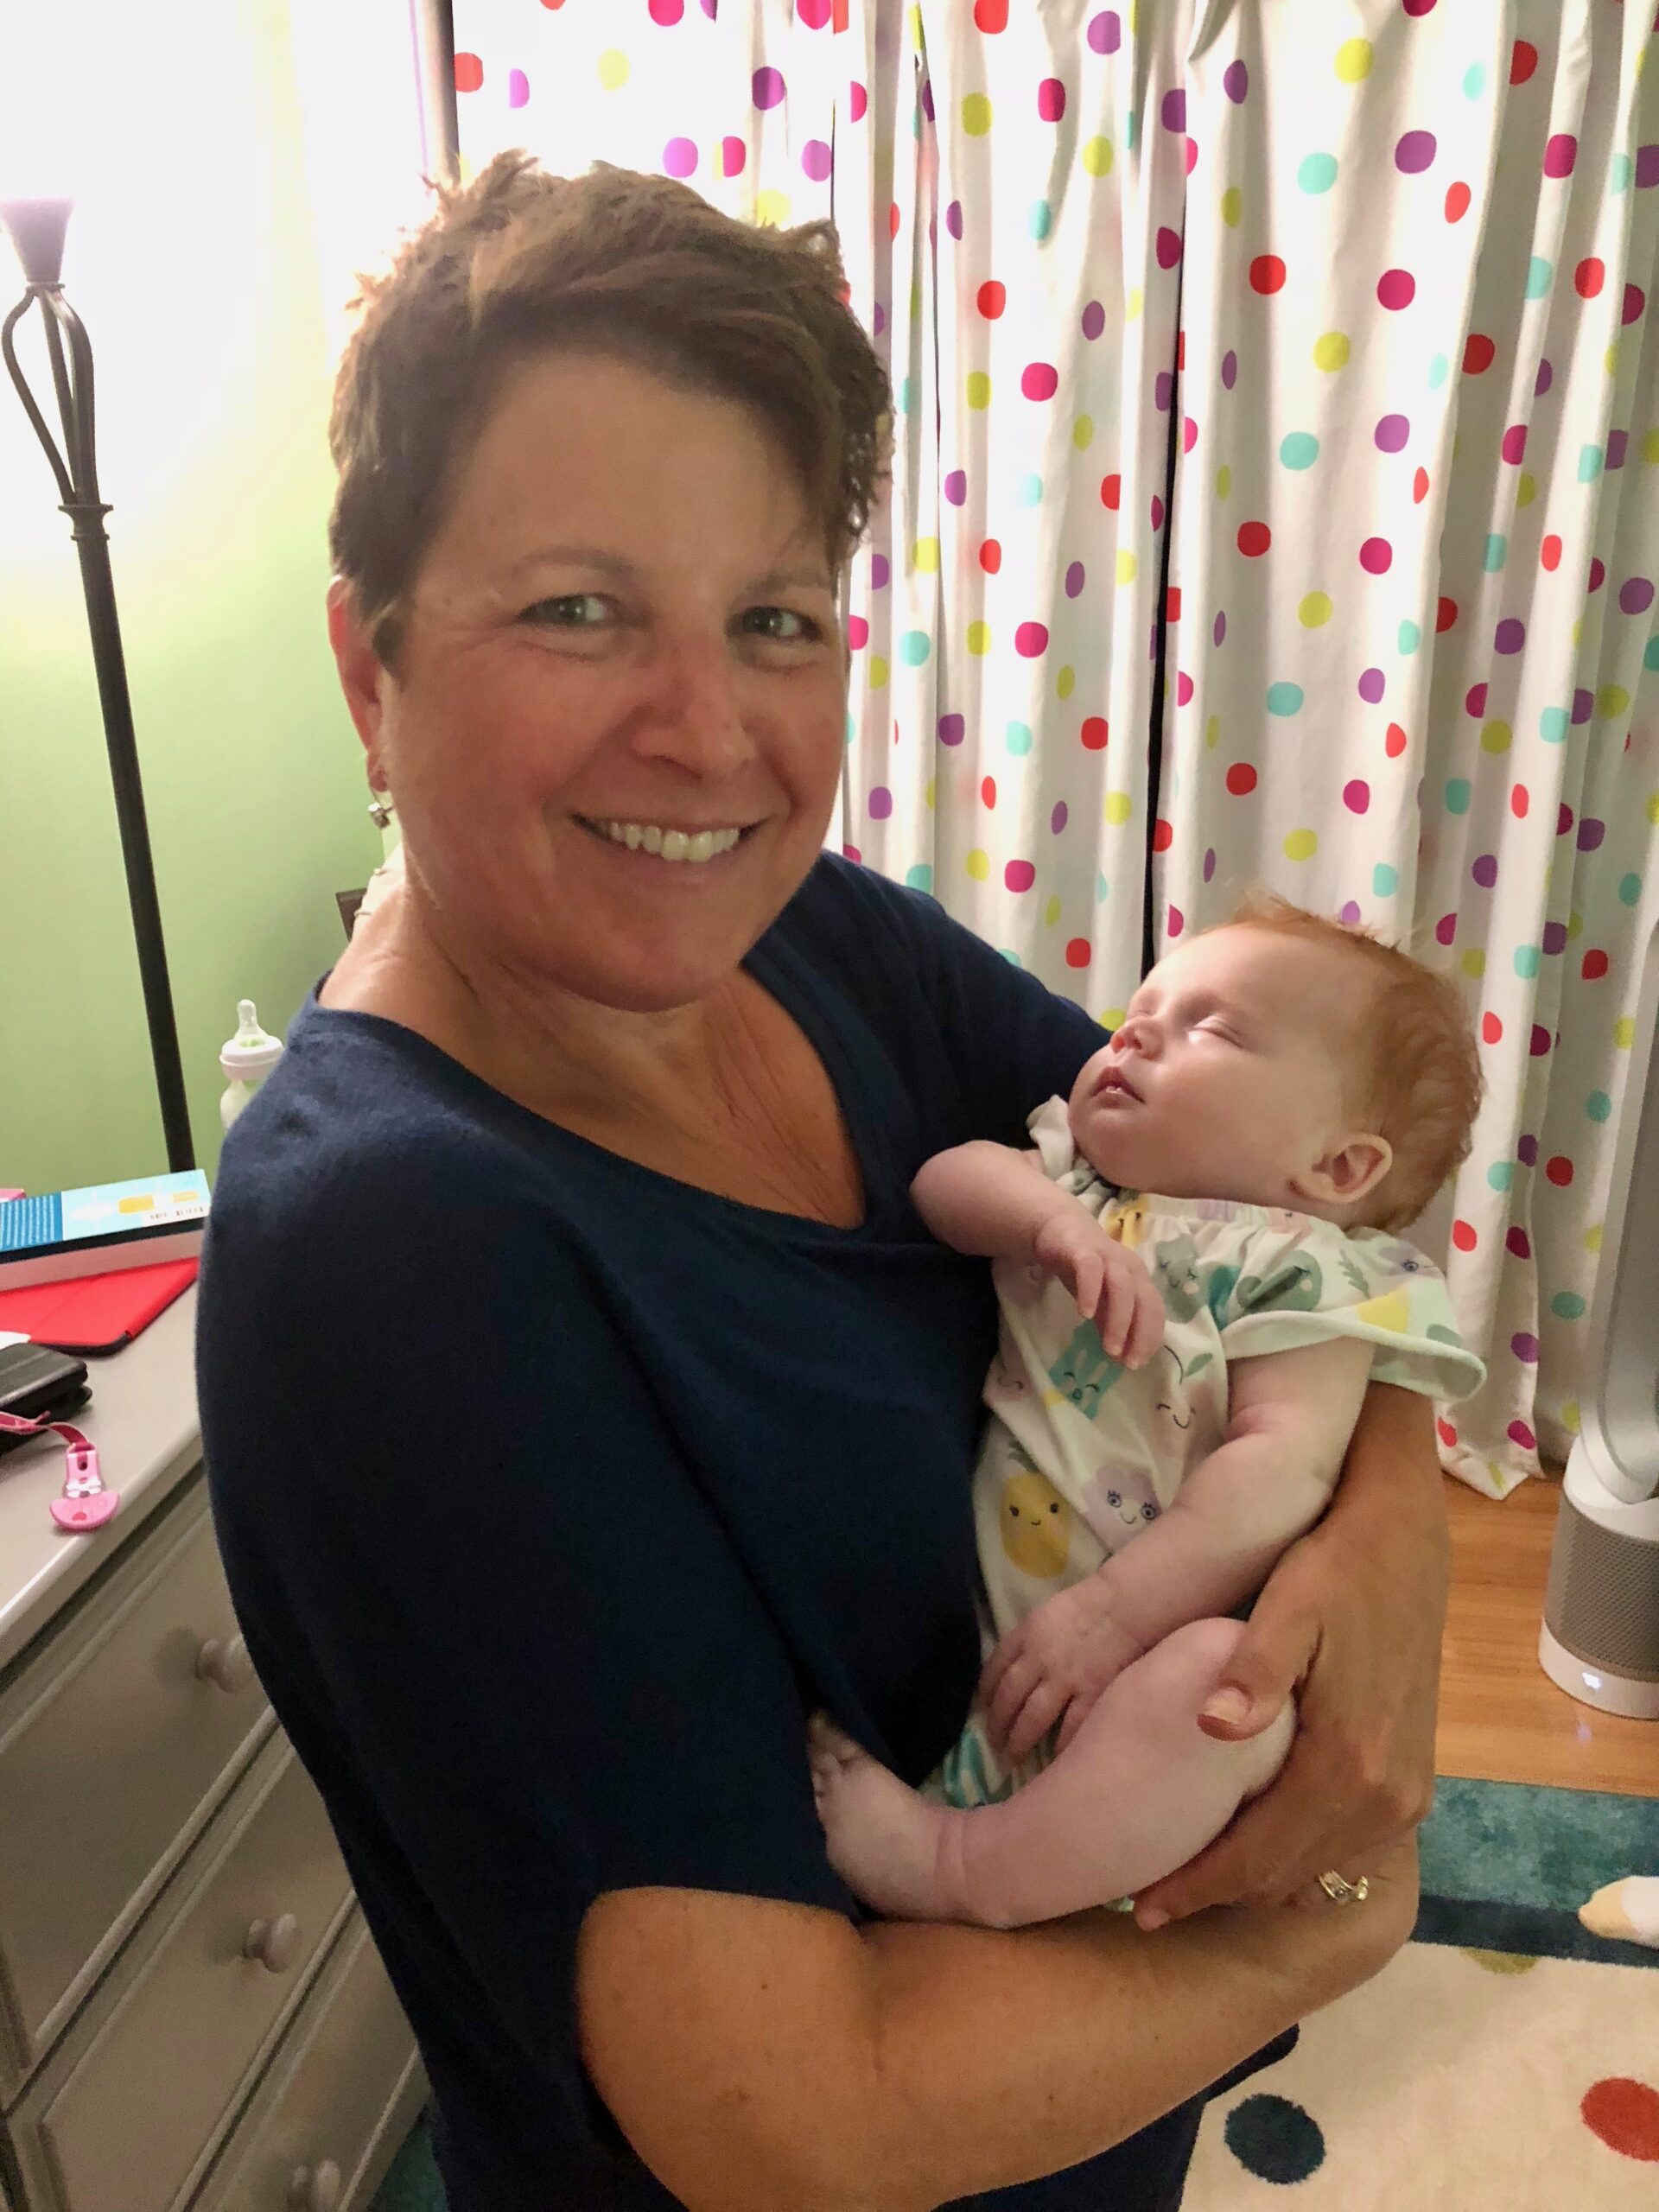 Lori Kling holds Eleanor, a baby who had been adopted, during a follow-up visit. COURTESY LORI KLING